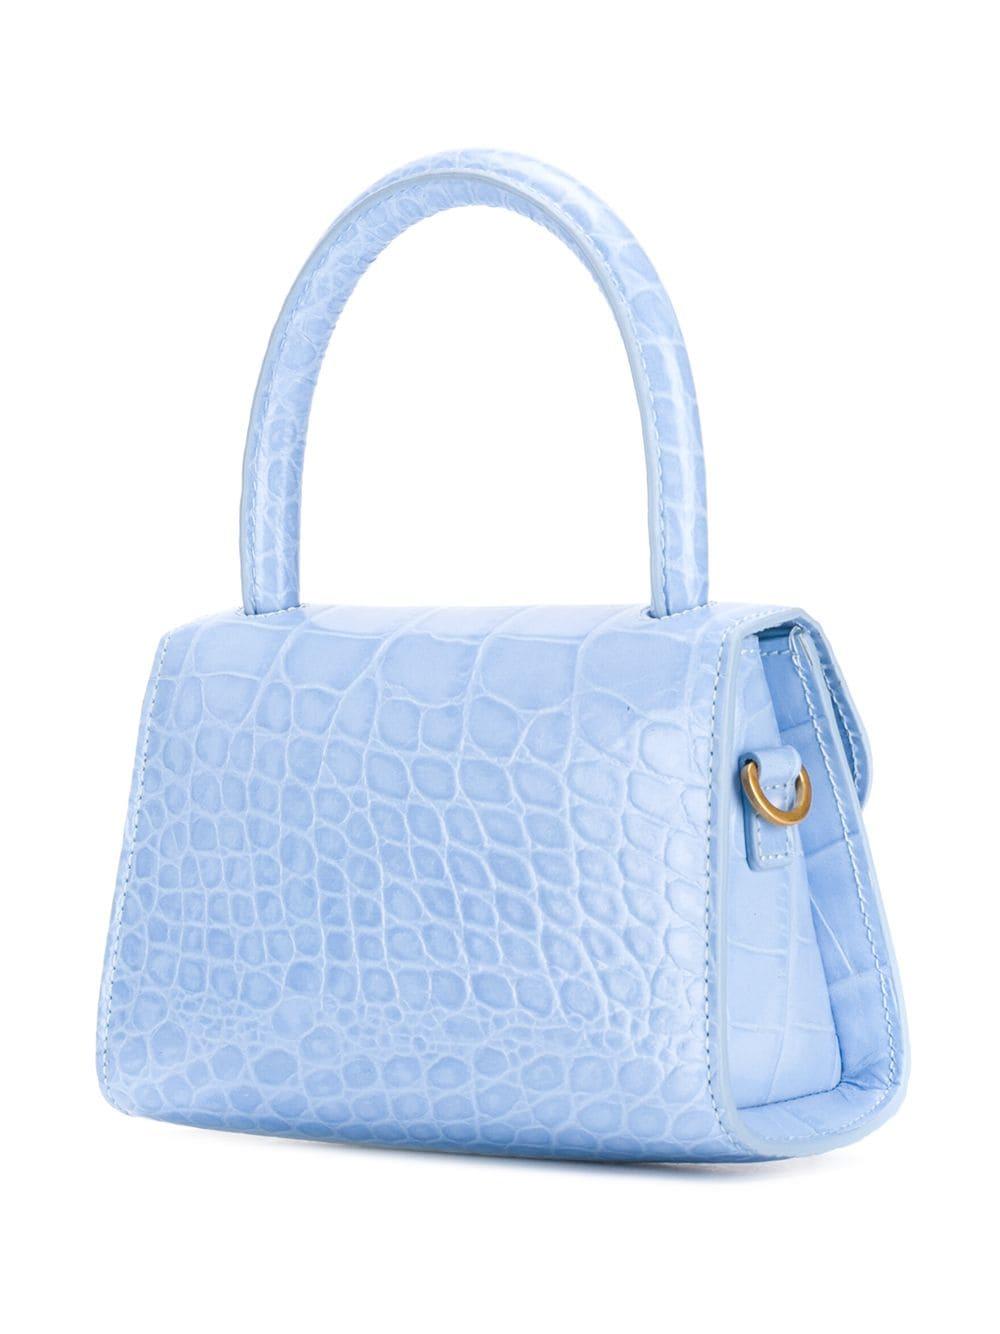 BY FAR Mini Croco Embossed Leather Bag in Blue - Lyst